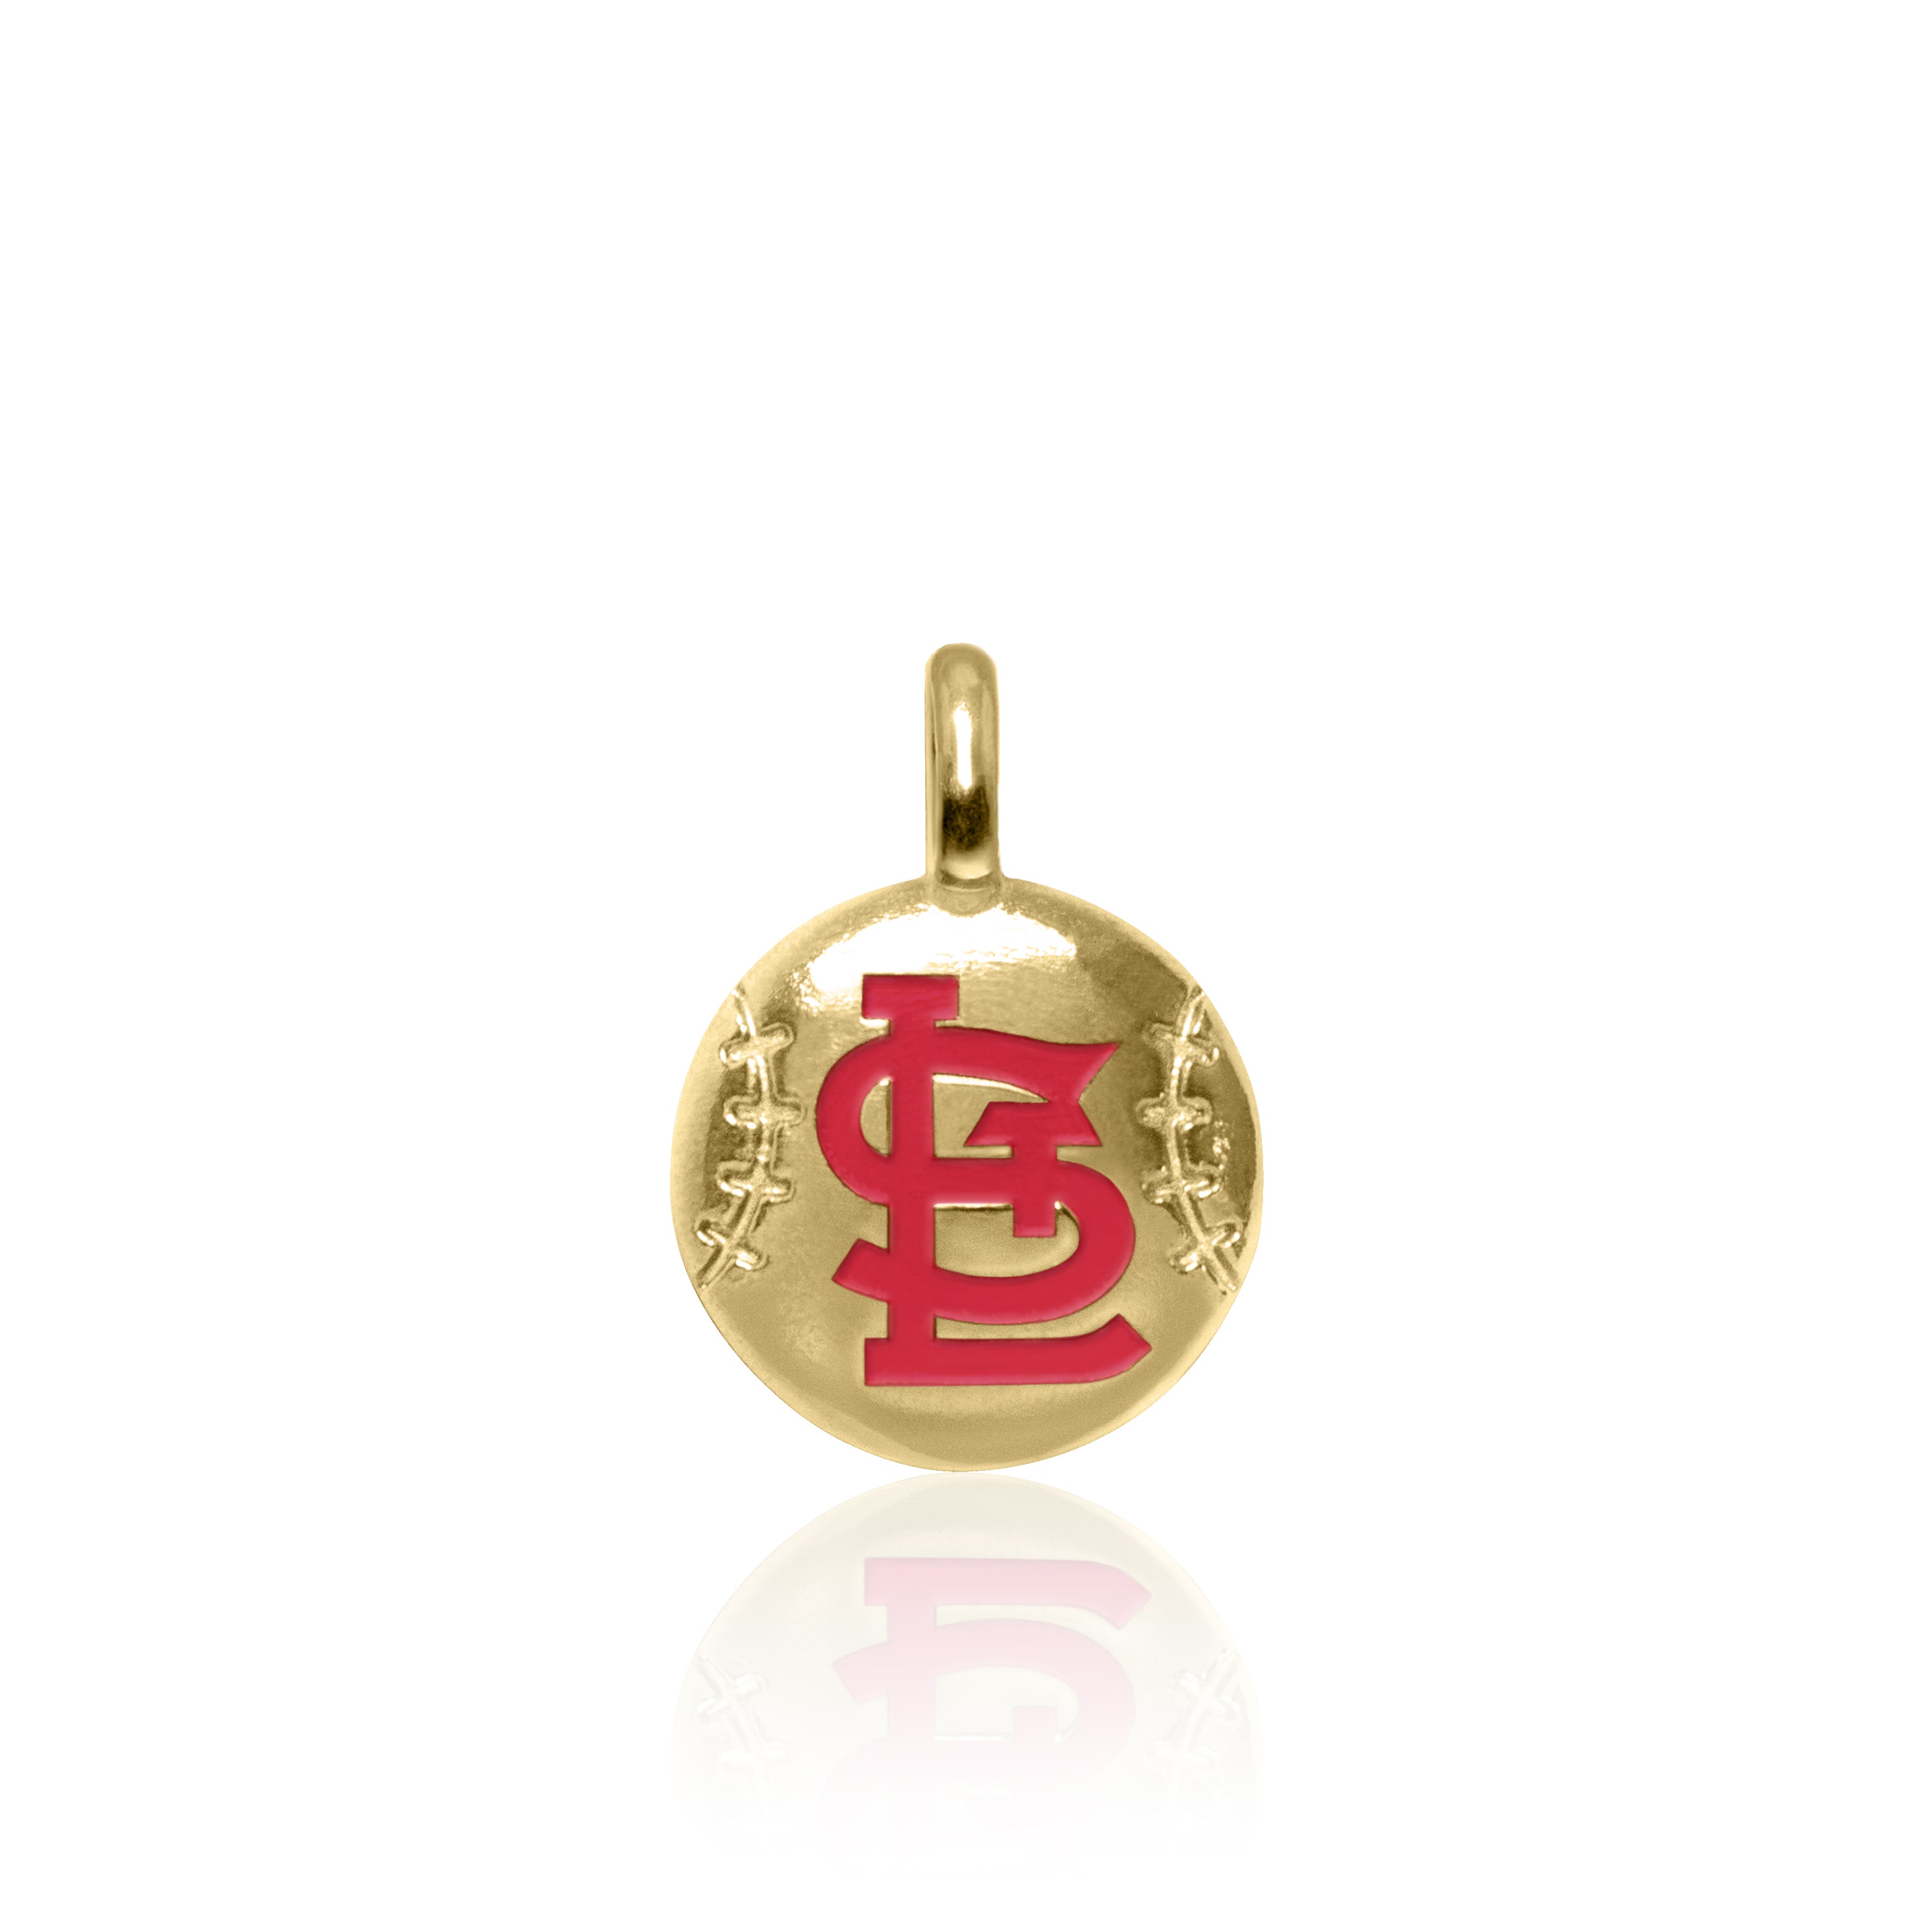 14kt Yellow Gold MLB St. Louis Cardinals Pendant Necklace. 18